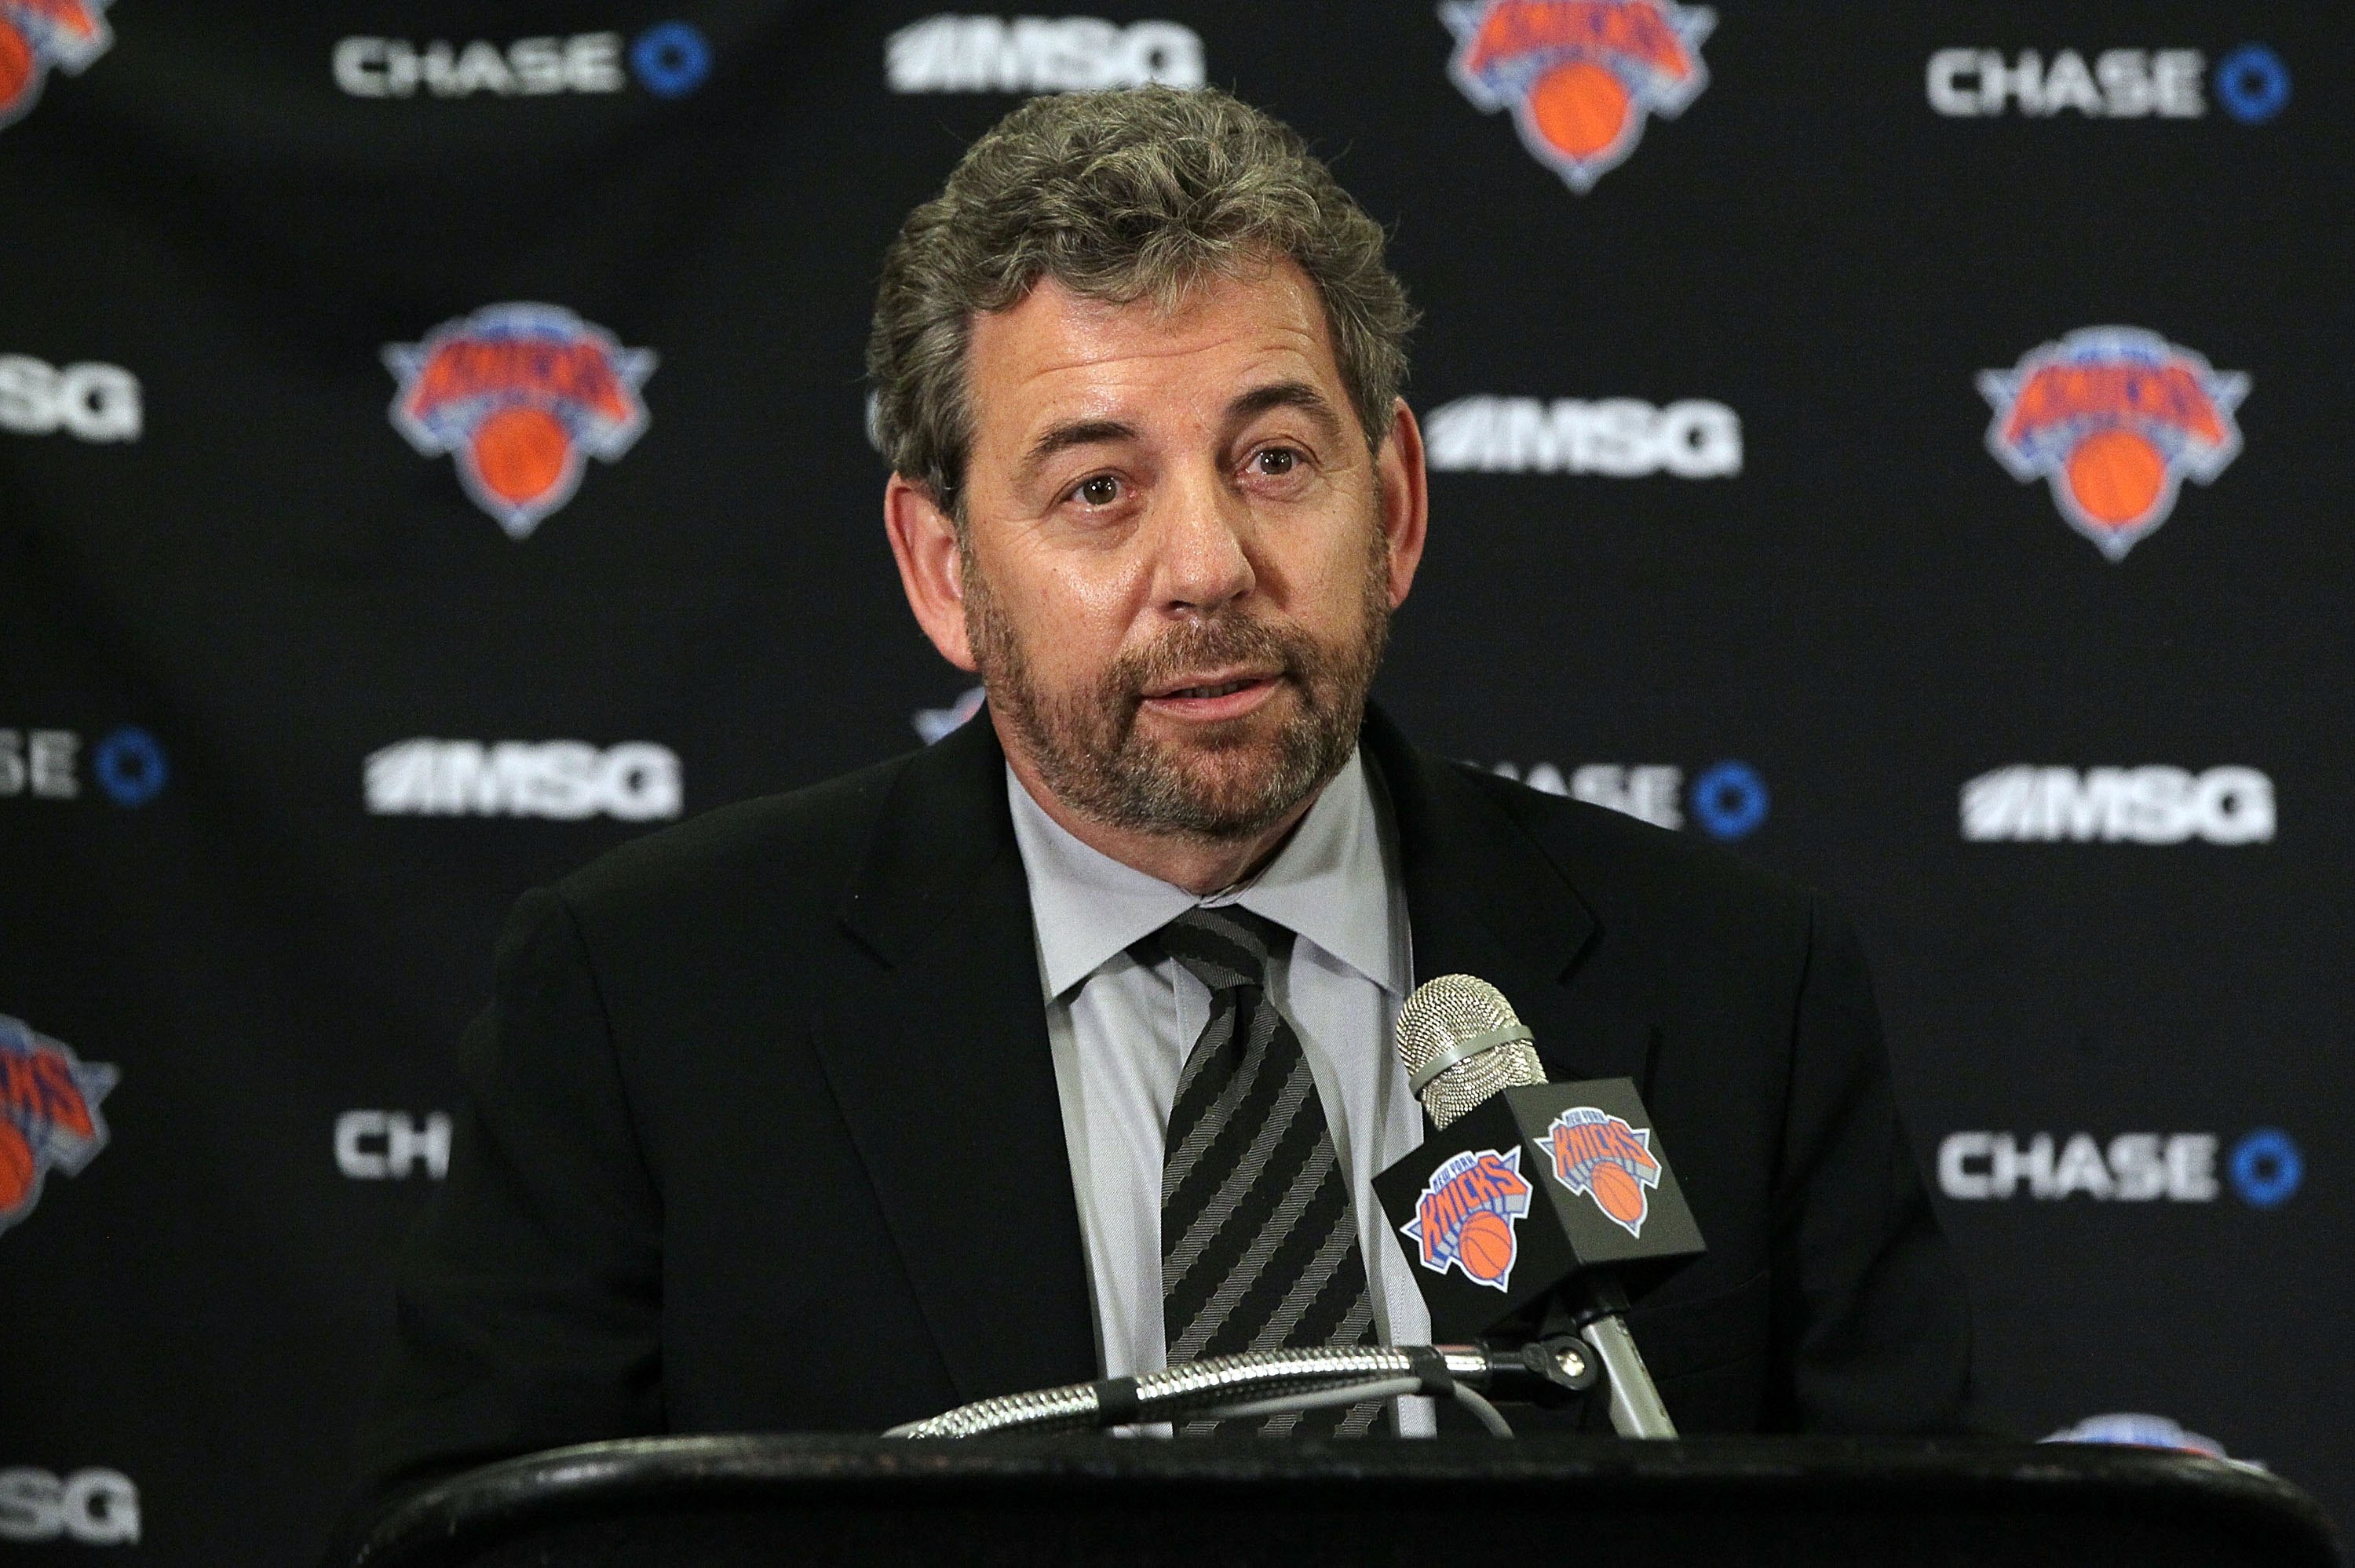 Executive Chairman of Madison Square Garden James L Dolan speaks to the media prior to the New York Knicks game against the Portland Trail Blazers on Wednesday, March 14 2012 at Madison Square Garden in New York. (Jim McIsaac&mdash;Getty Images)